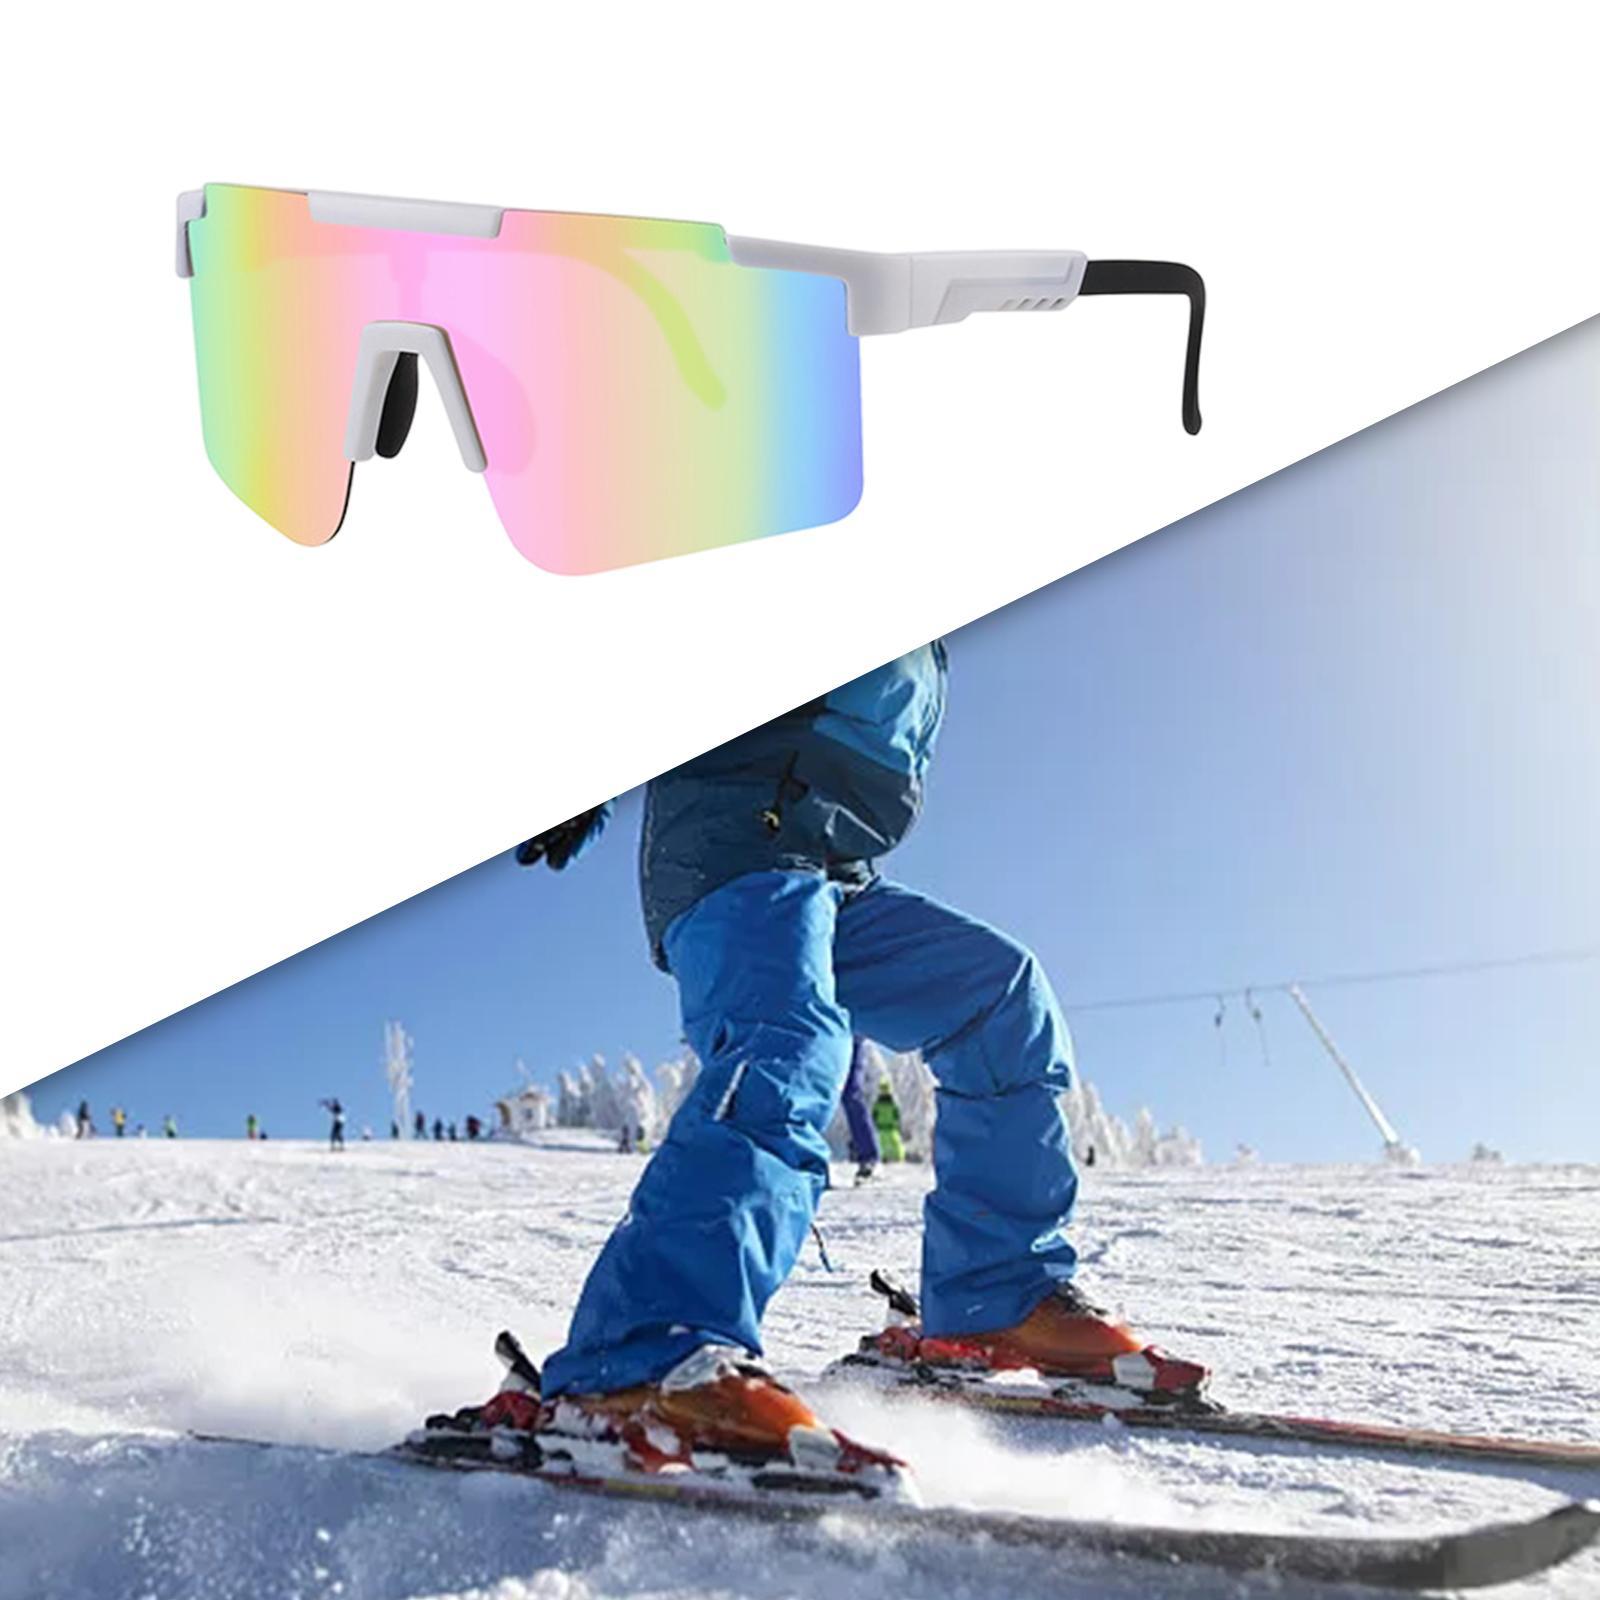 Polarized Sunglasses for Men and Women Cycling Sunglasses for Running Biking